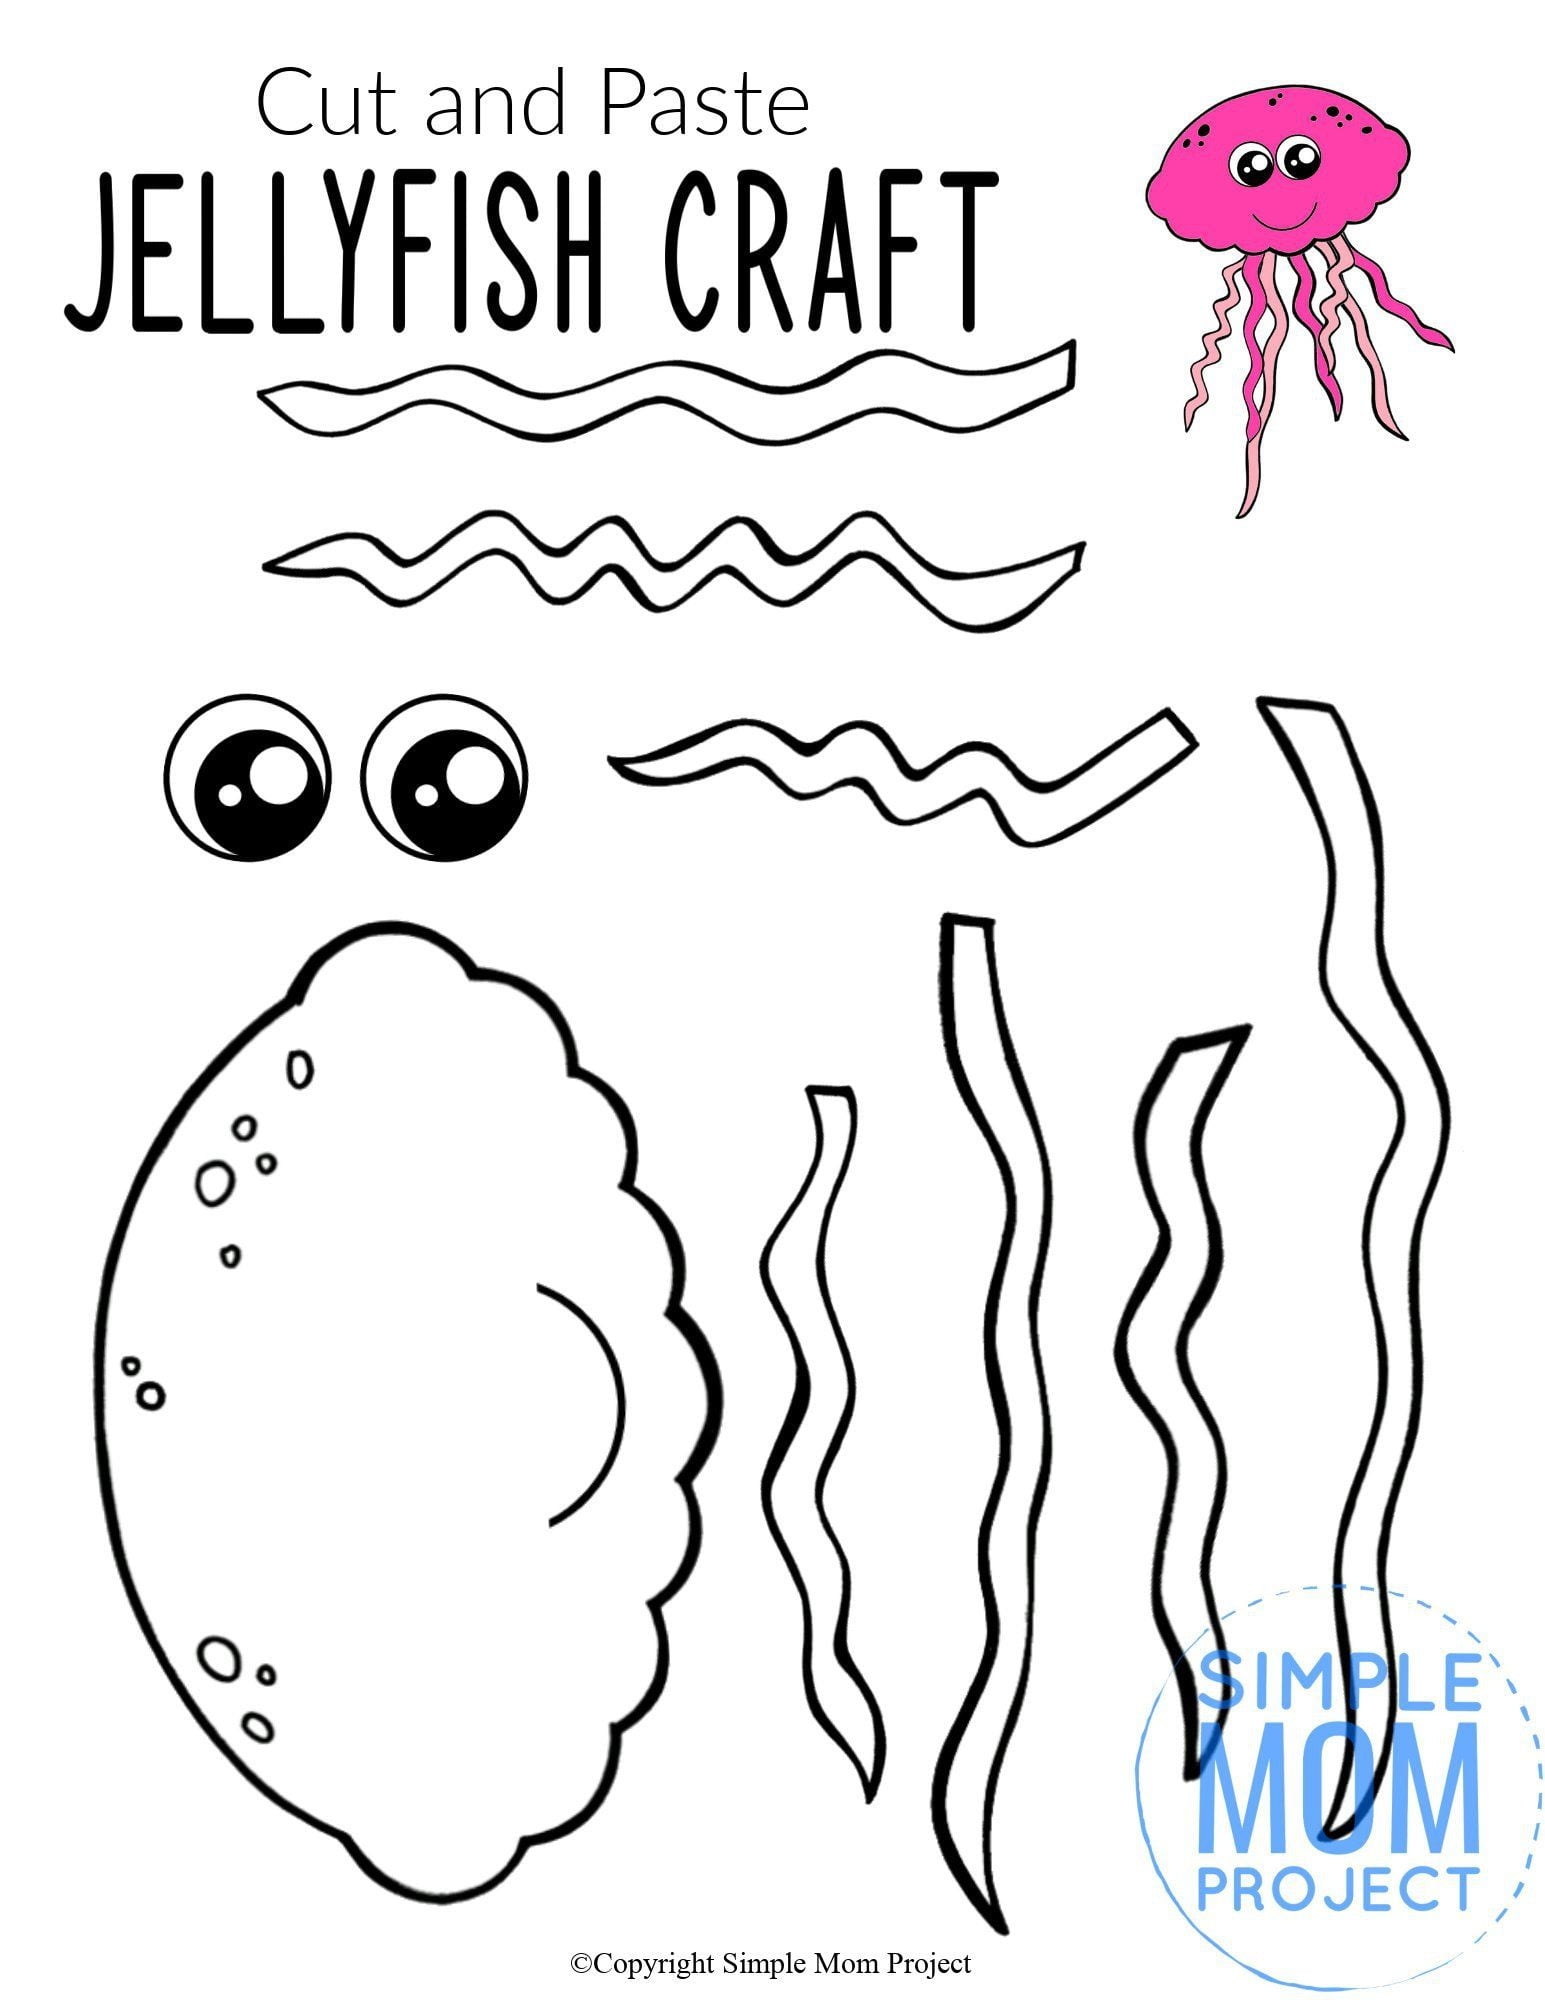 Easy DiY Jellyfish Craft With Free Jellyfish Template Ocean Animal Crafts Jellyfish Craft Animal Crafts For Kids